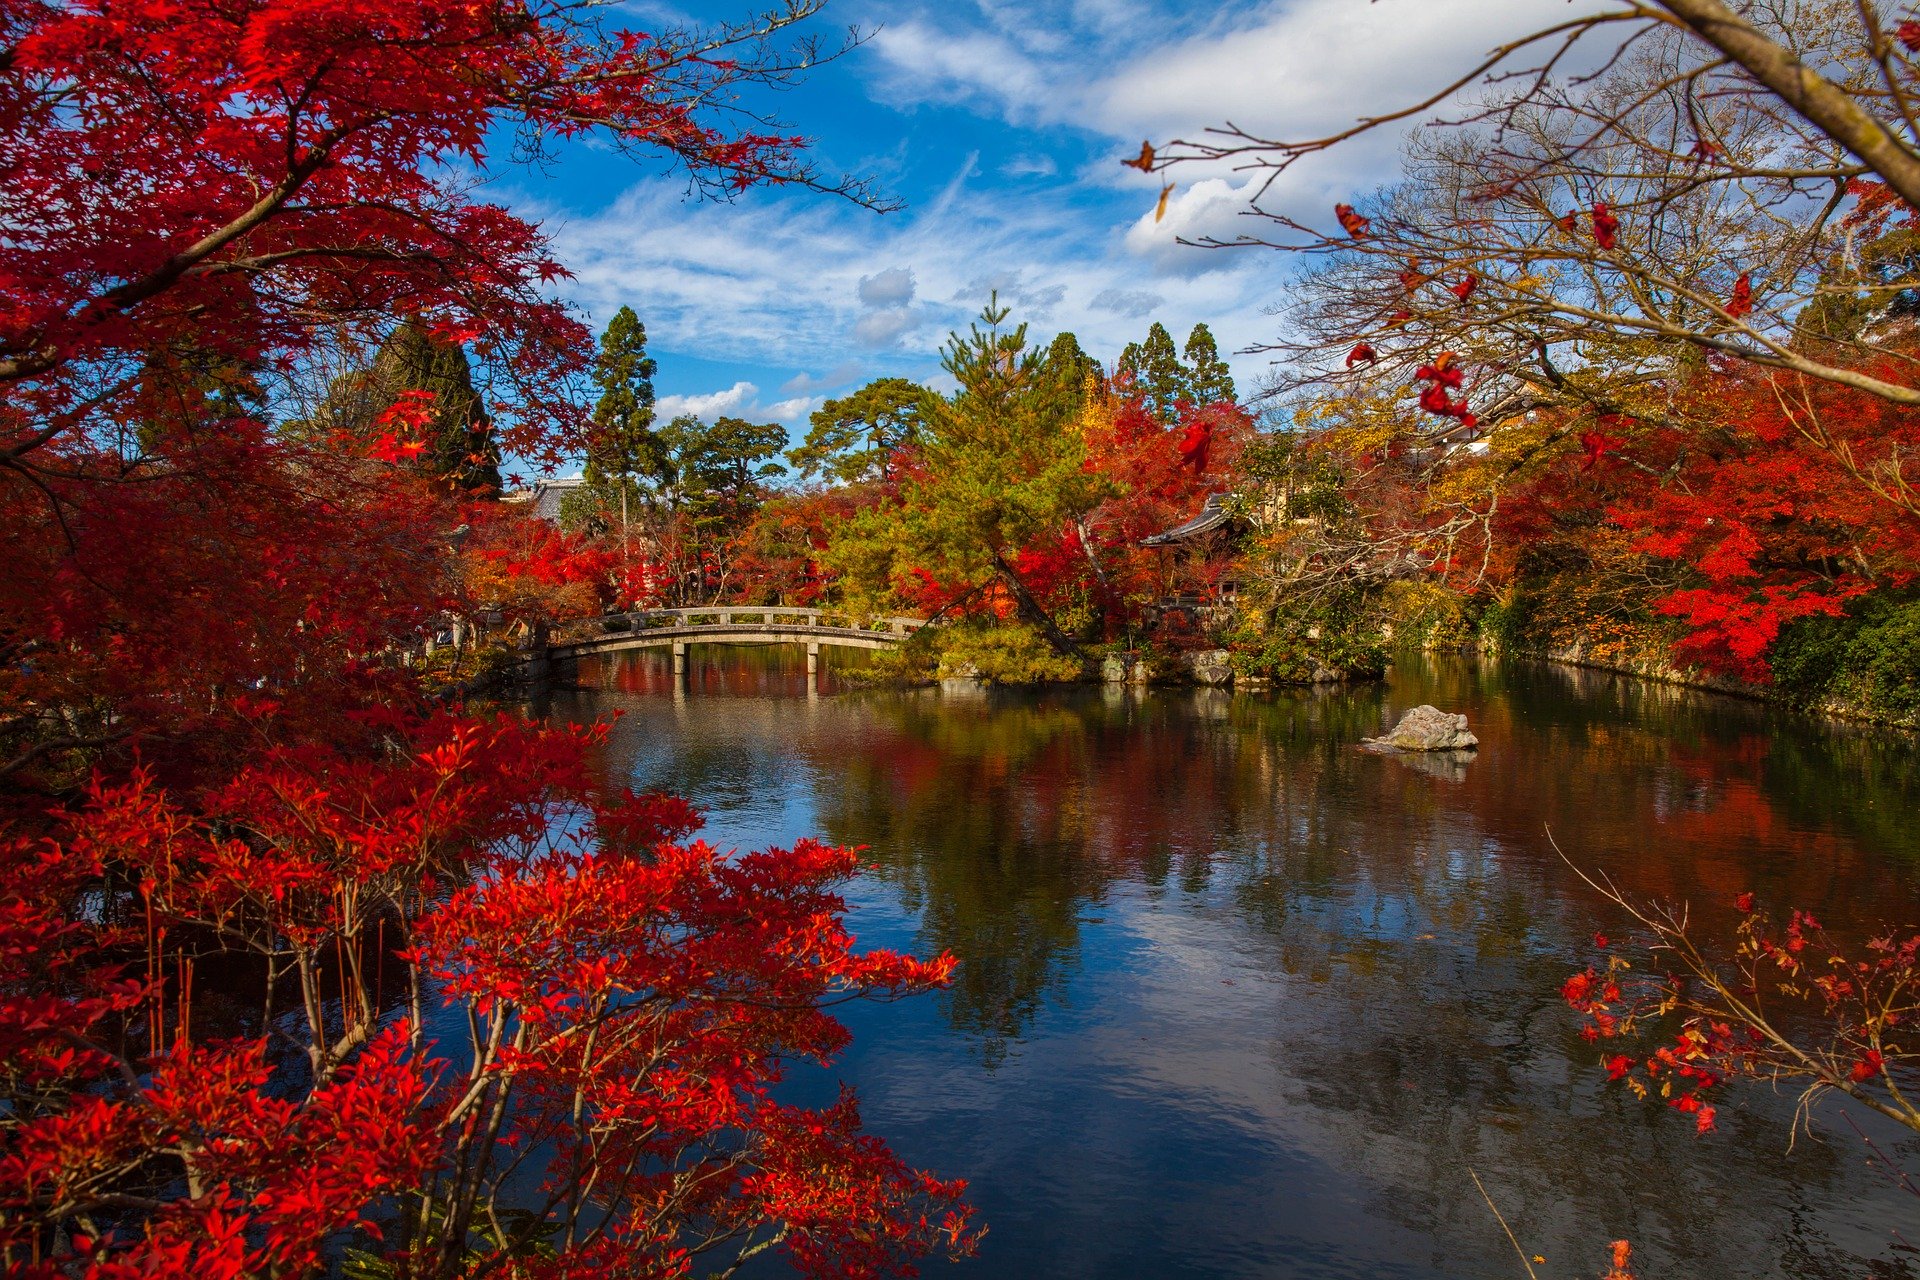 Gorgeous autumn leaves and scenery in Kyoto Japan